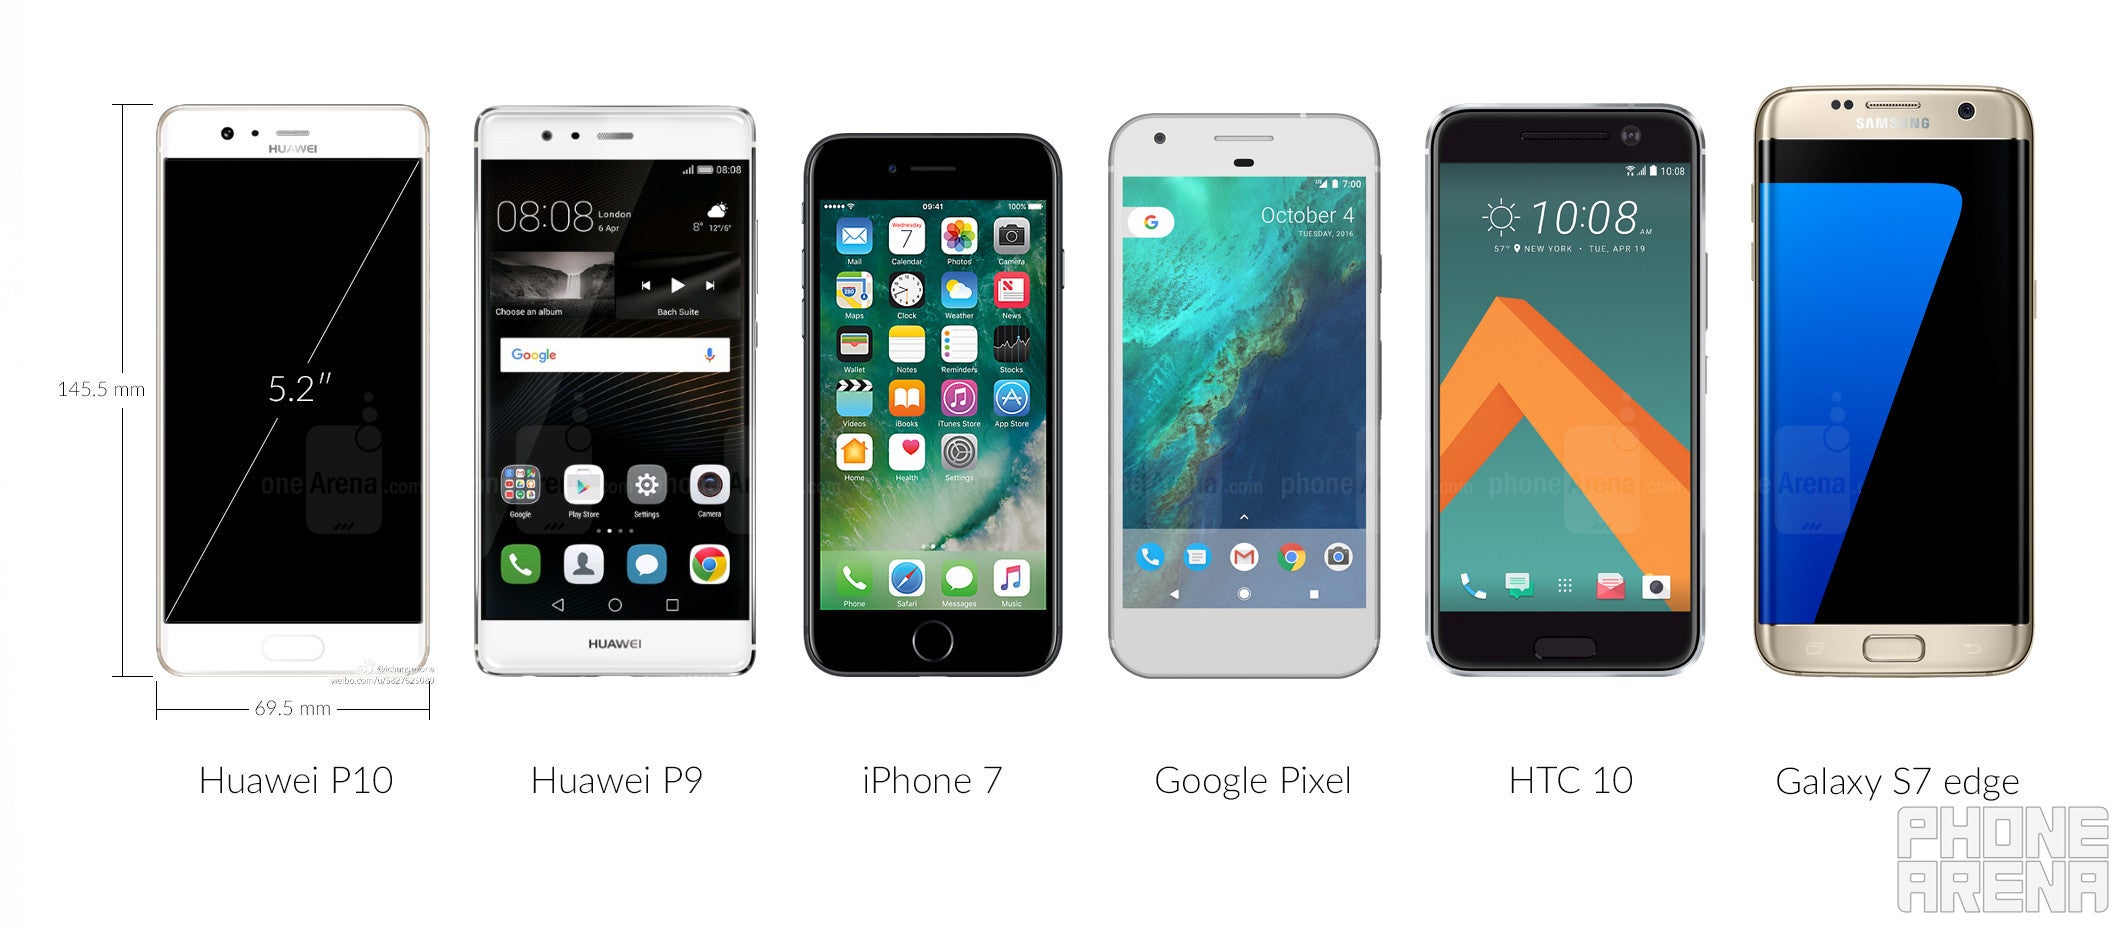 Click image to enlarge - Huawei P10 vs Google Pixel, iPhone 7, Huawei P9, Galaxy S7 edge, HTC 10: Preliminary size comparison